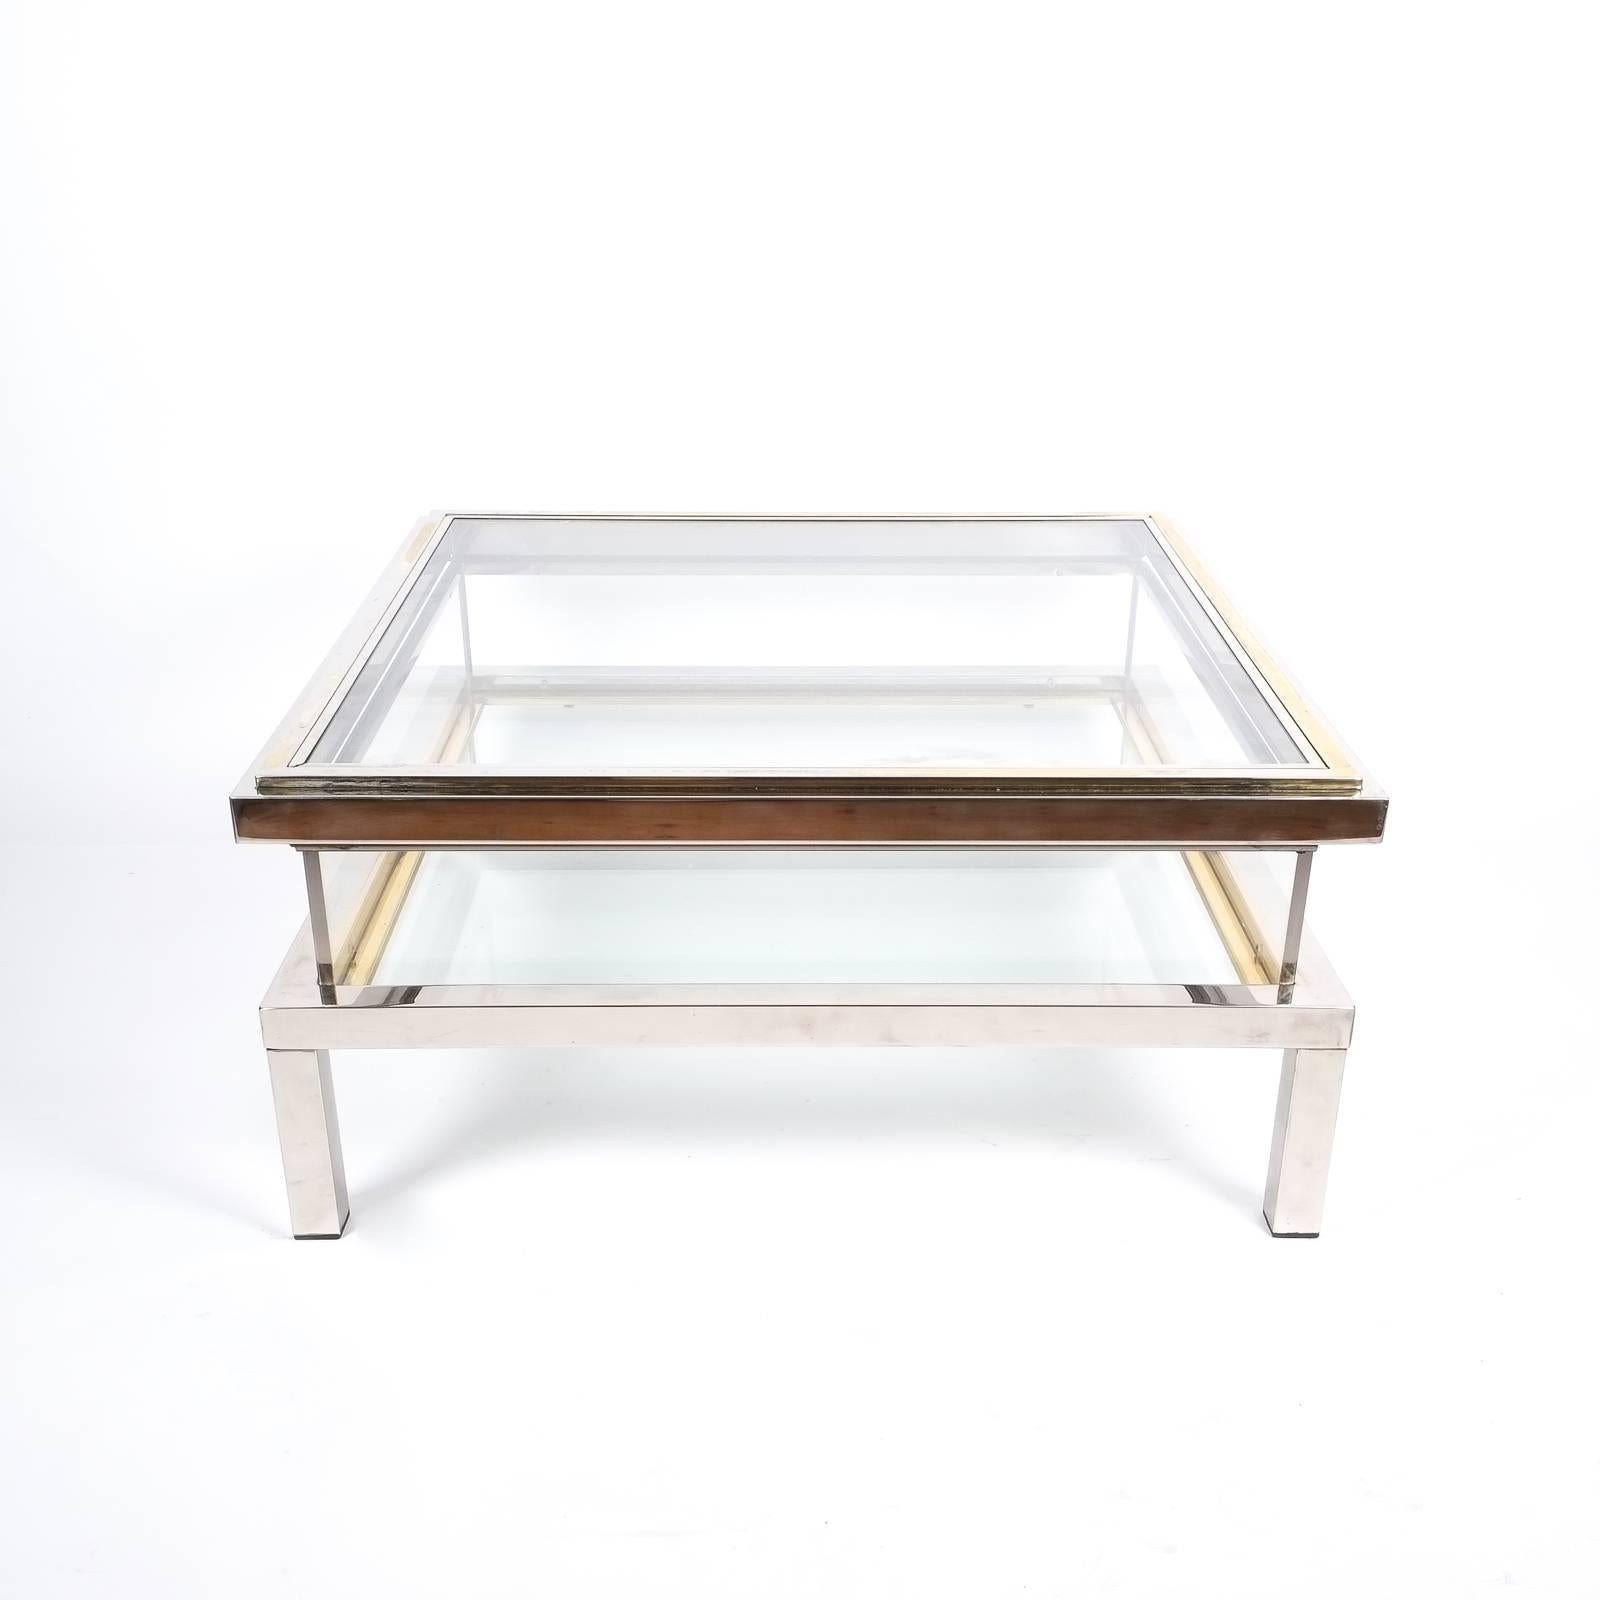 French Refurbished Maison Jansen Brass and Chrome Vitrine Coffee Table, 1970